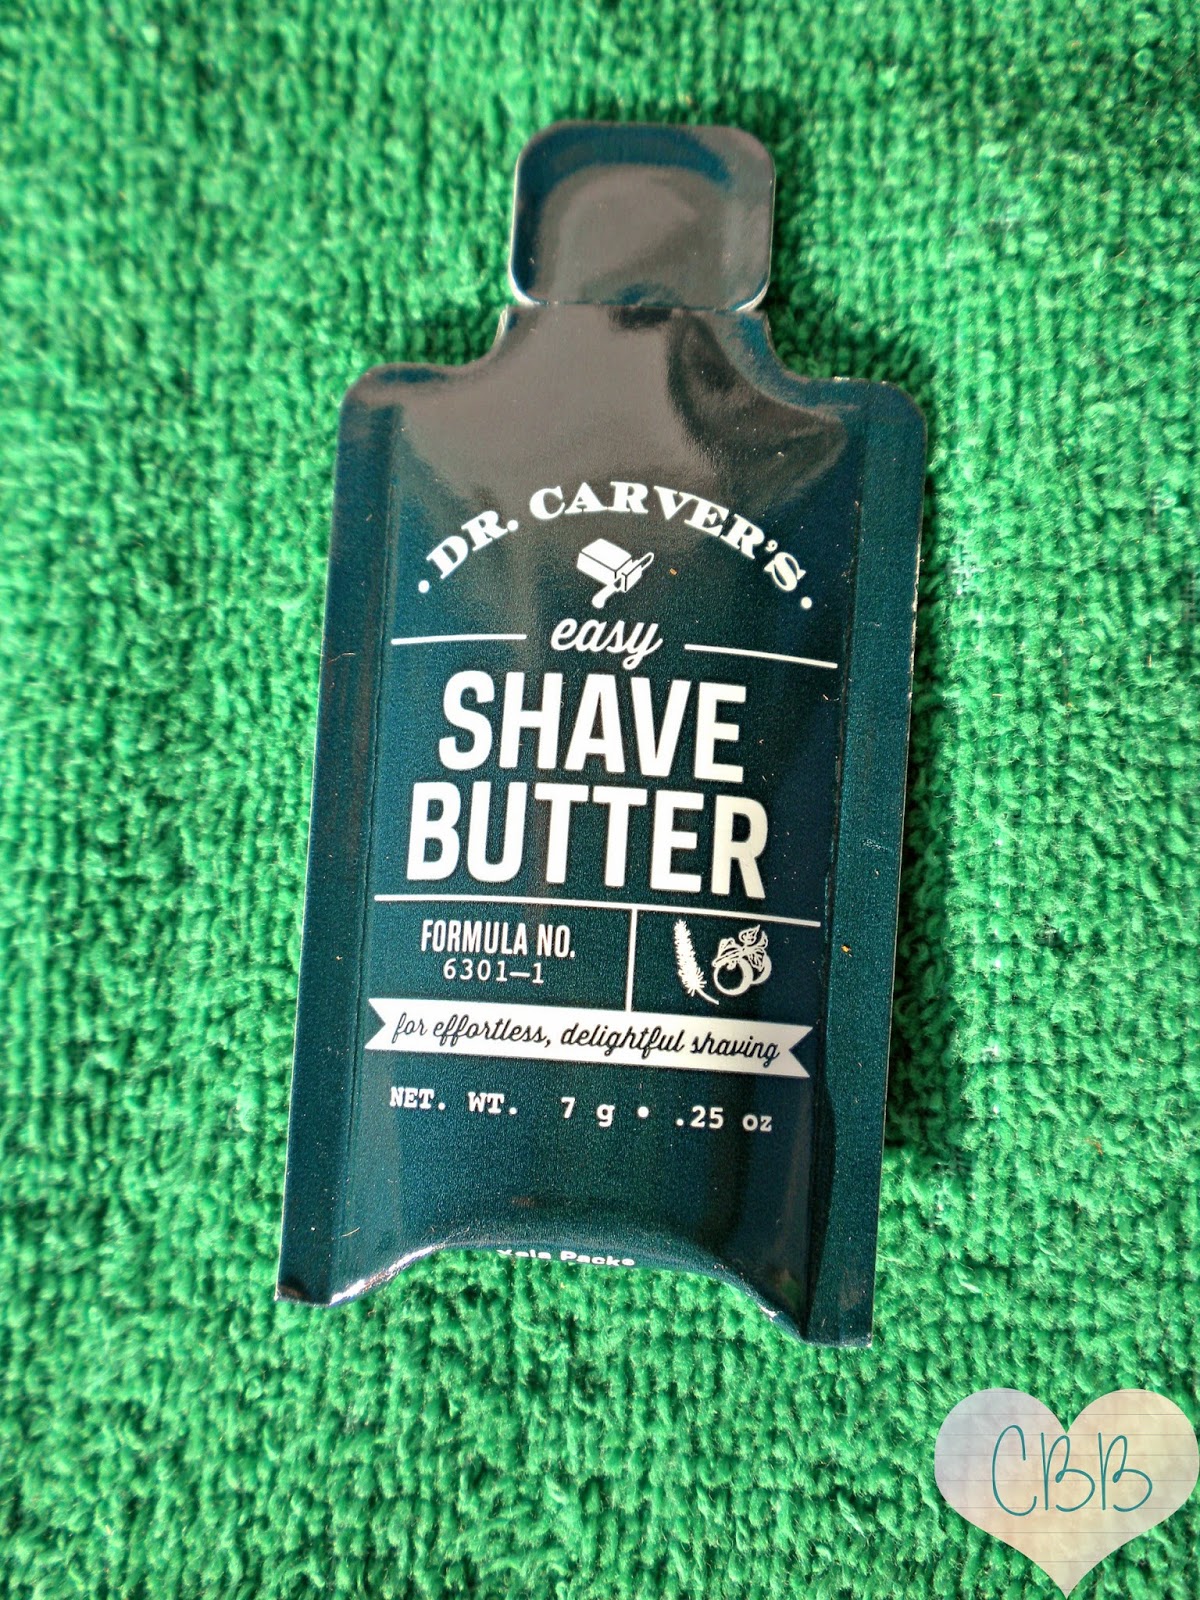 Review & Thrifty Find: Dollar Shave Club (and How to Get Their Products Cheaper!)